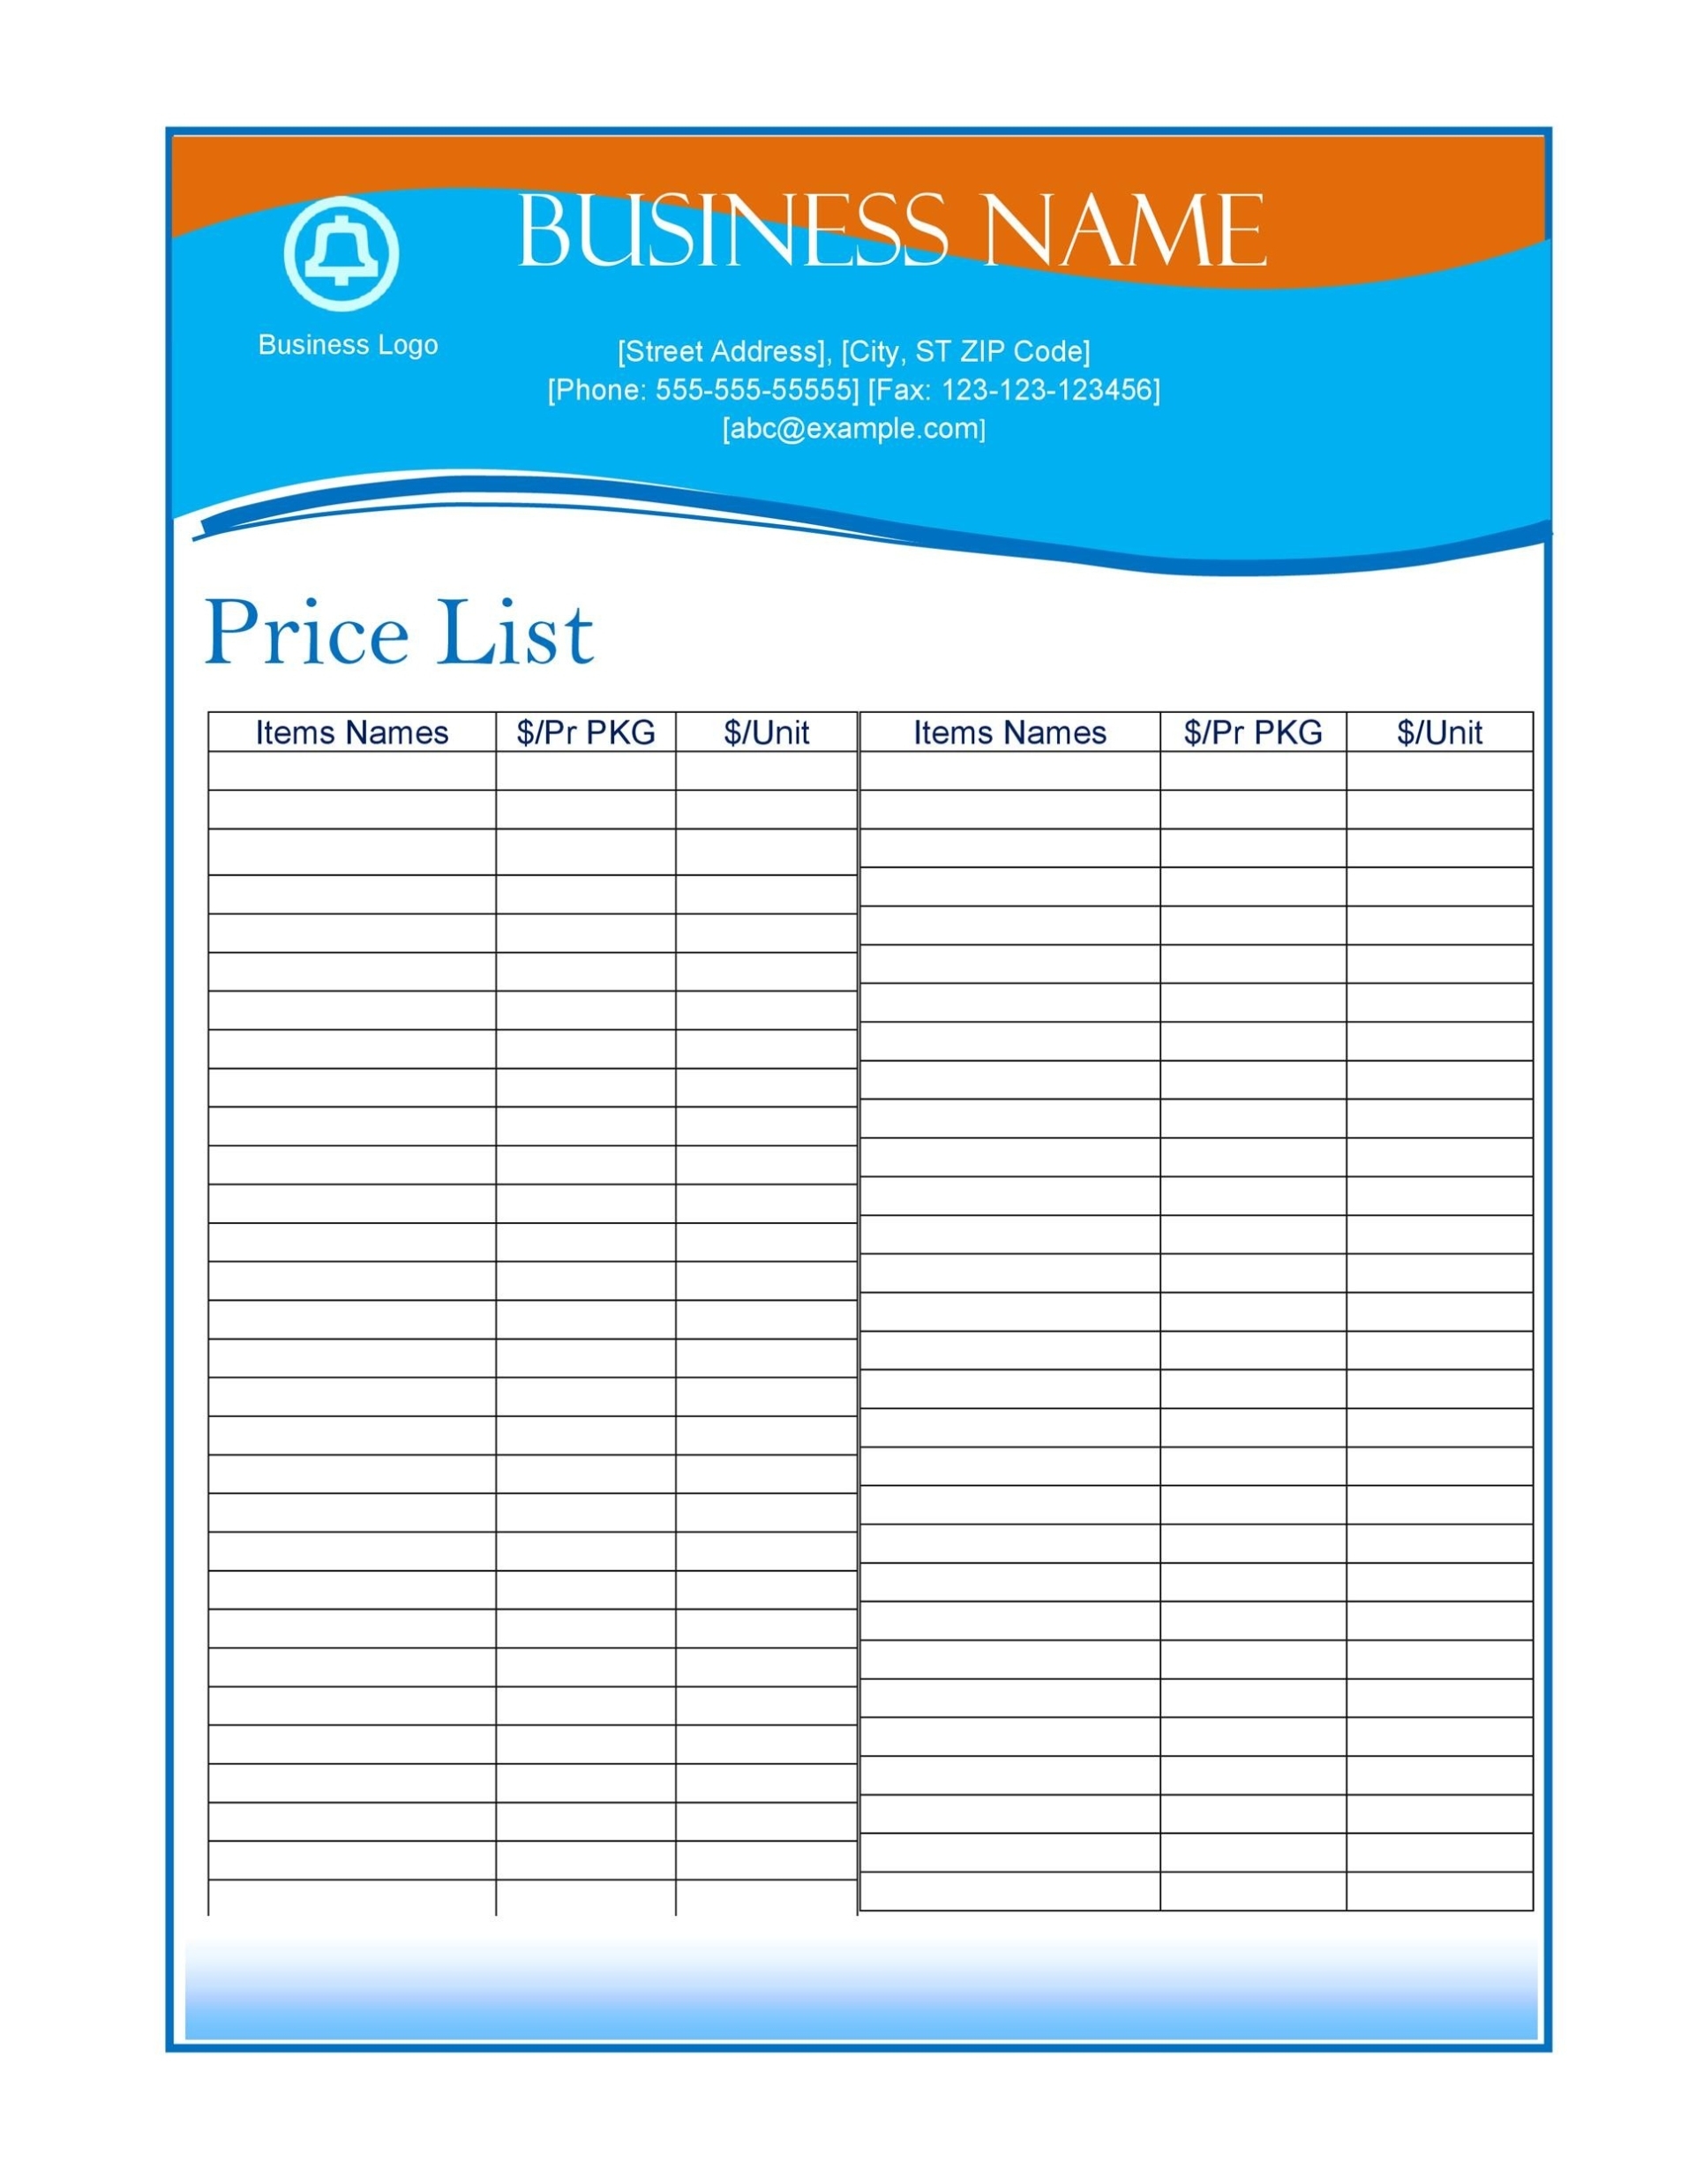 49 Free Price List Templates (Price Sheet Templates) ᐅ Templatelab Inside Free Business Directory Template